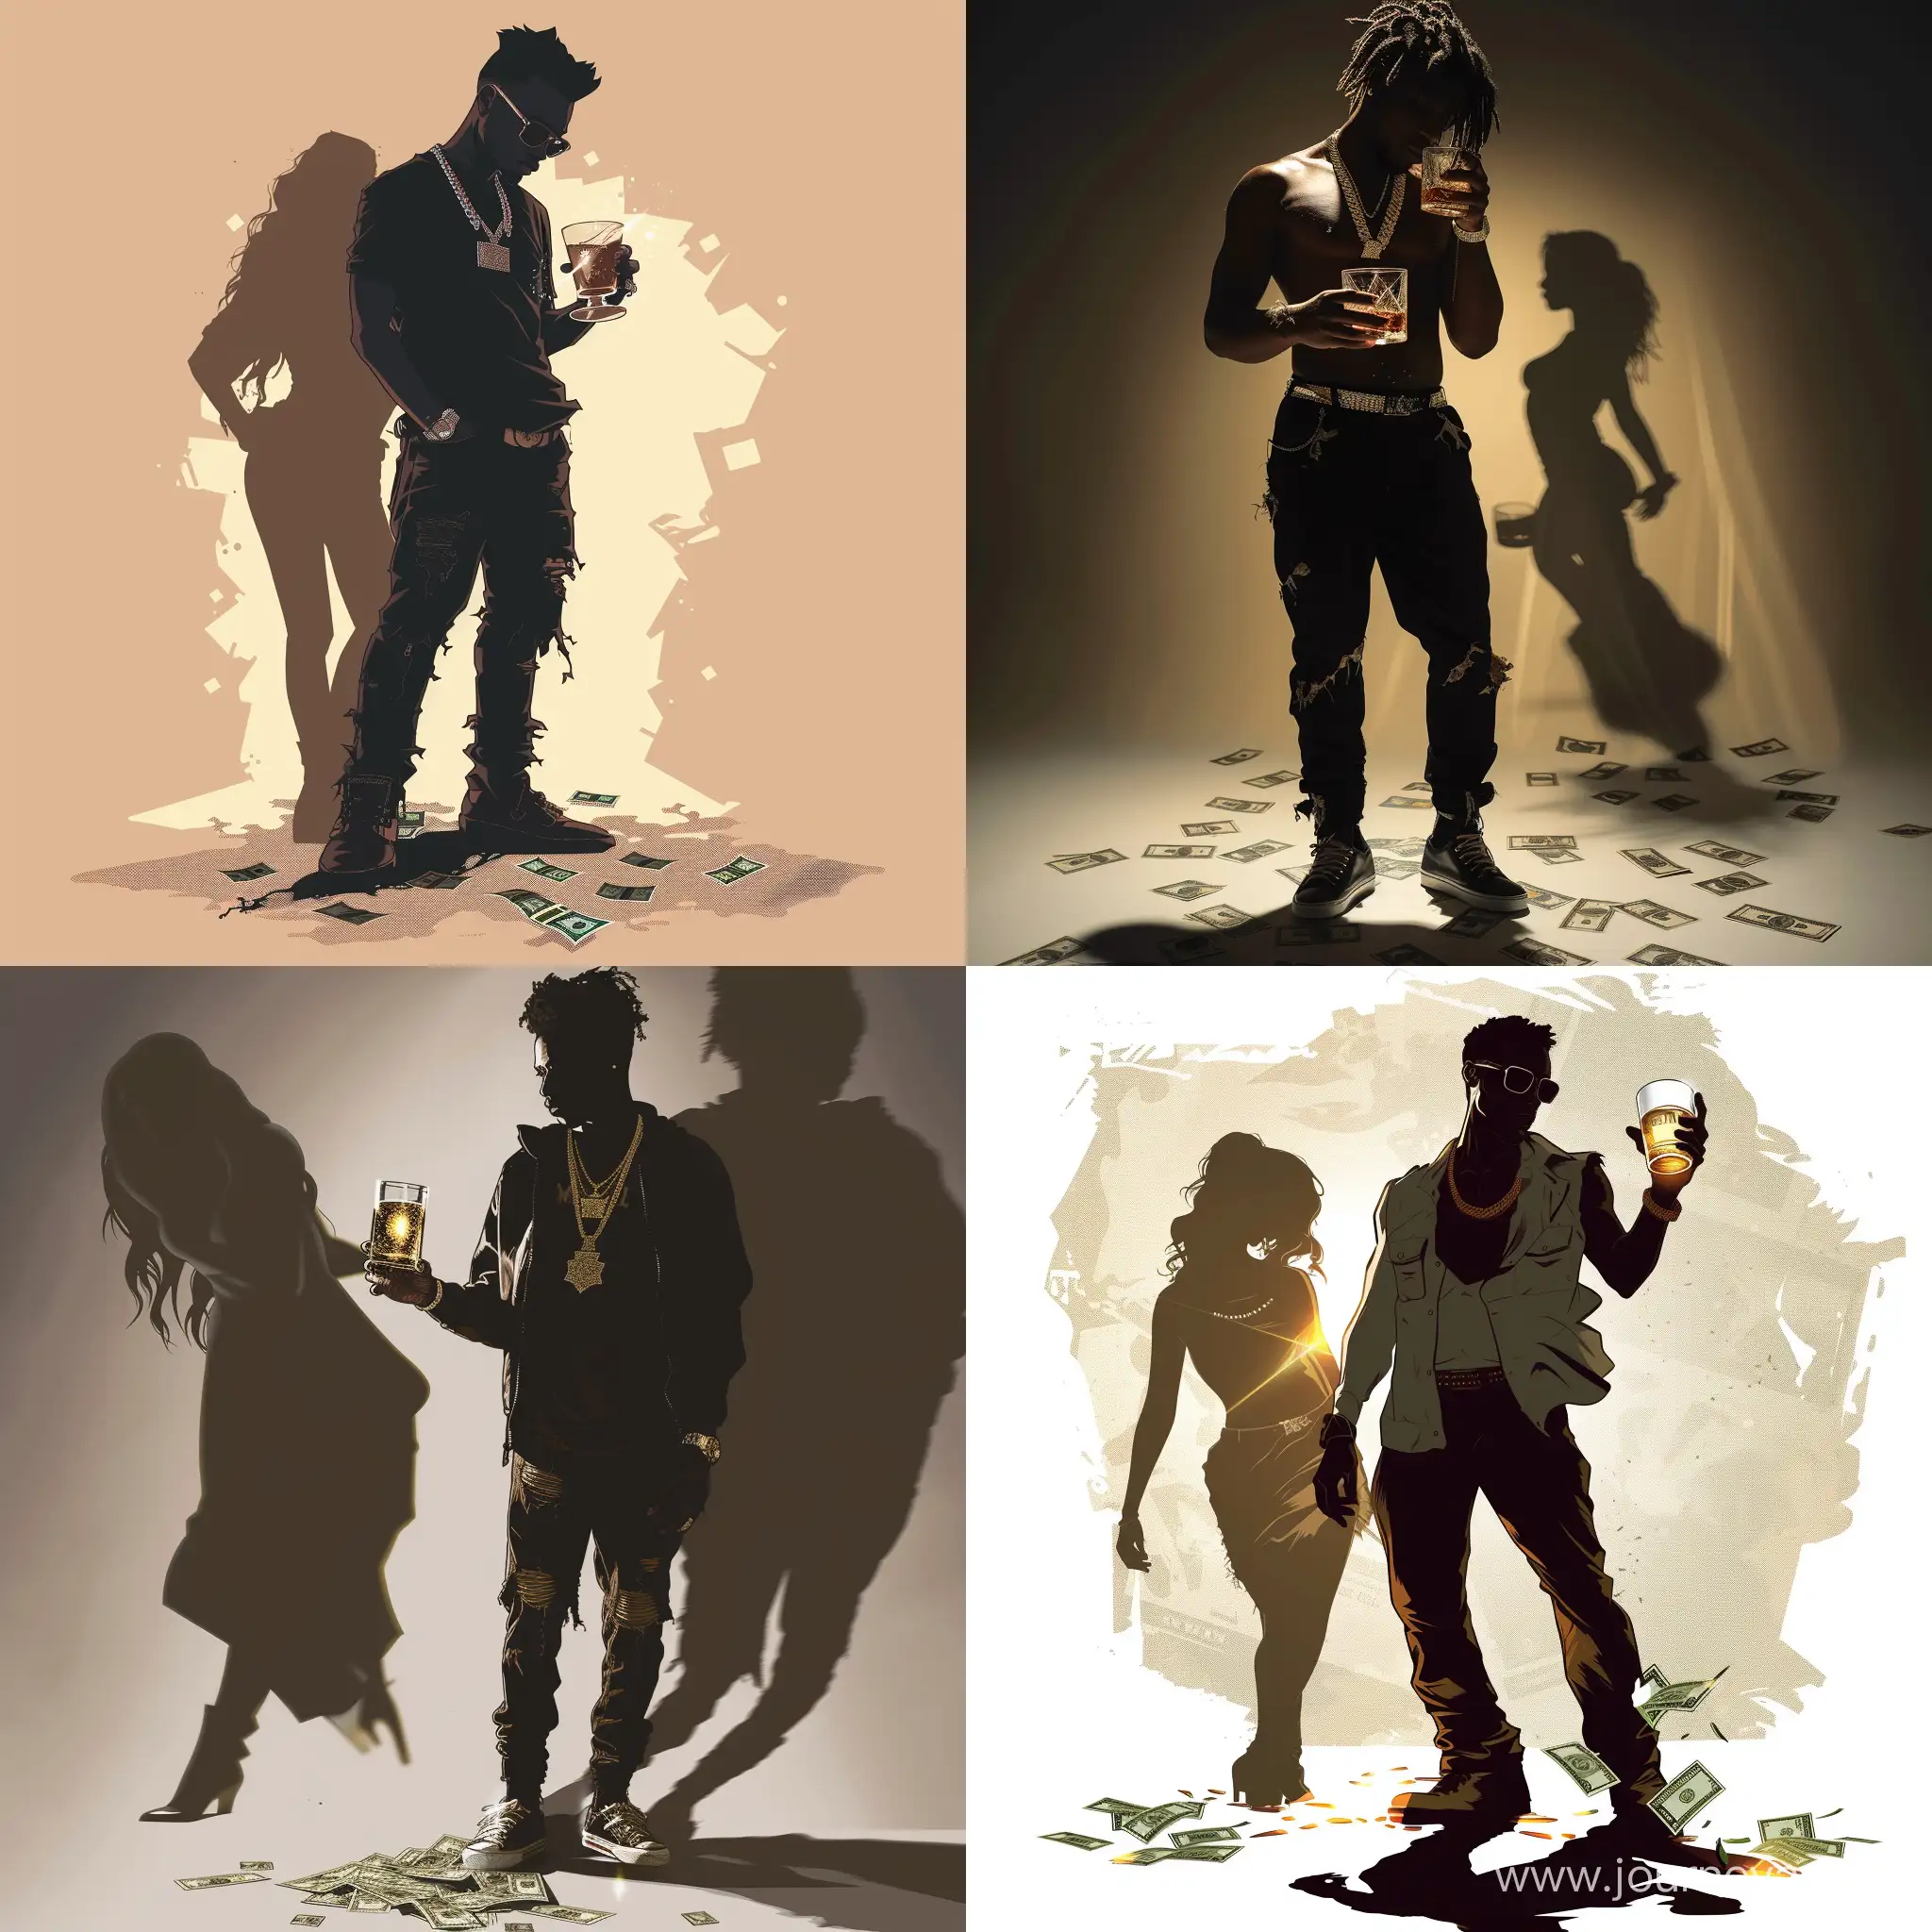 Stylish-Rapper-Enjoying-Whisky-Amidst-Wealth-with-Mysterious-Silhouette